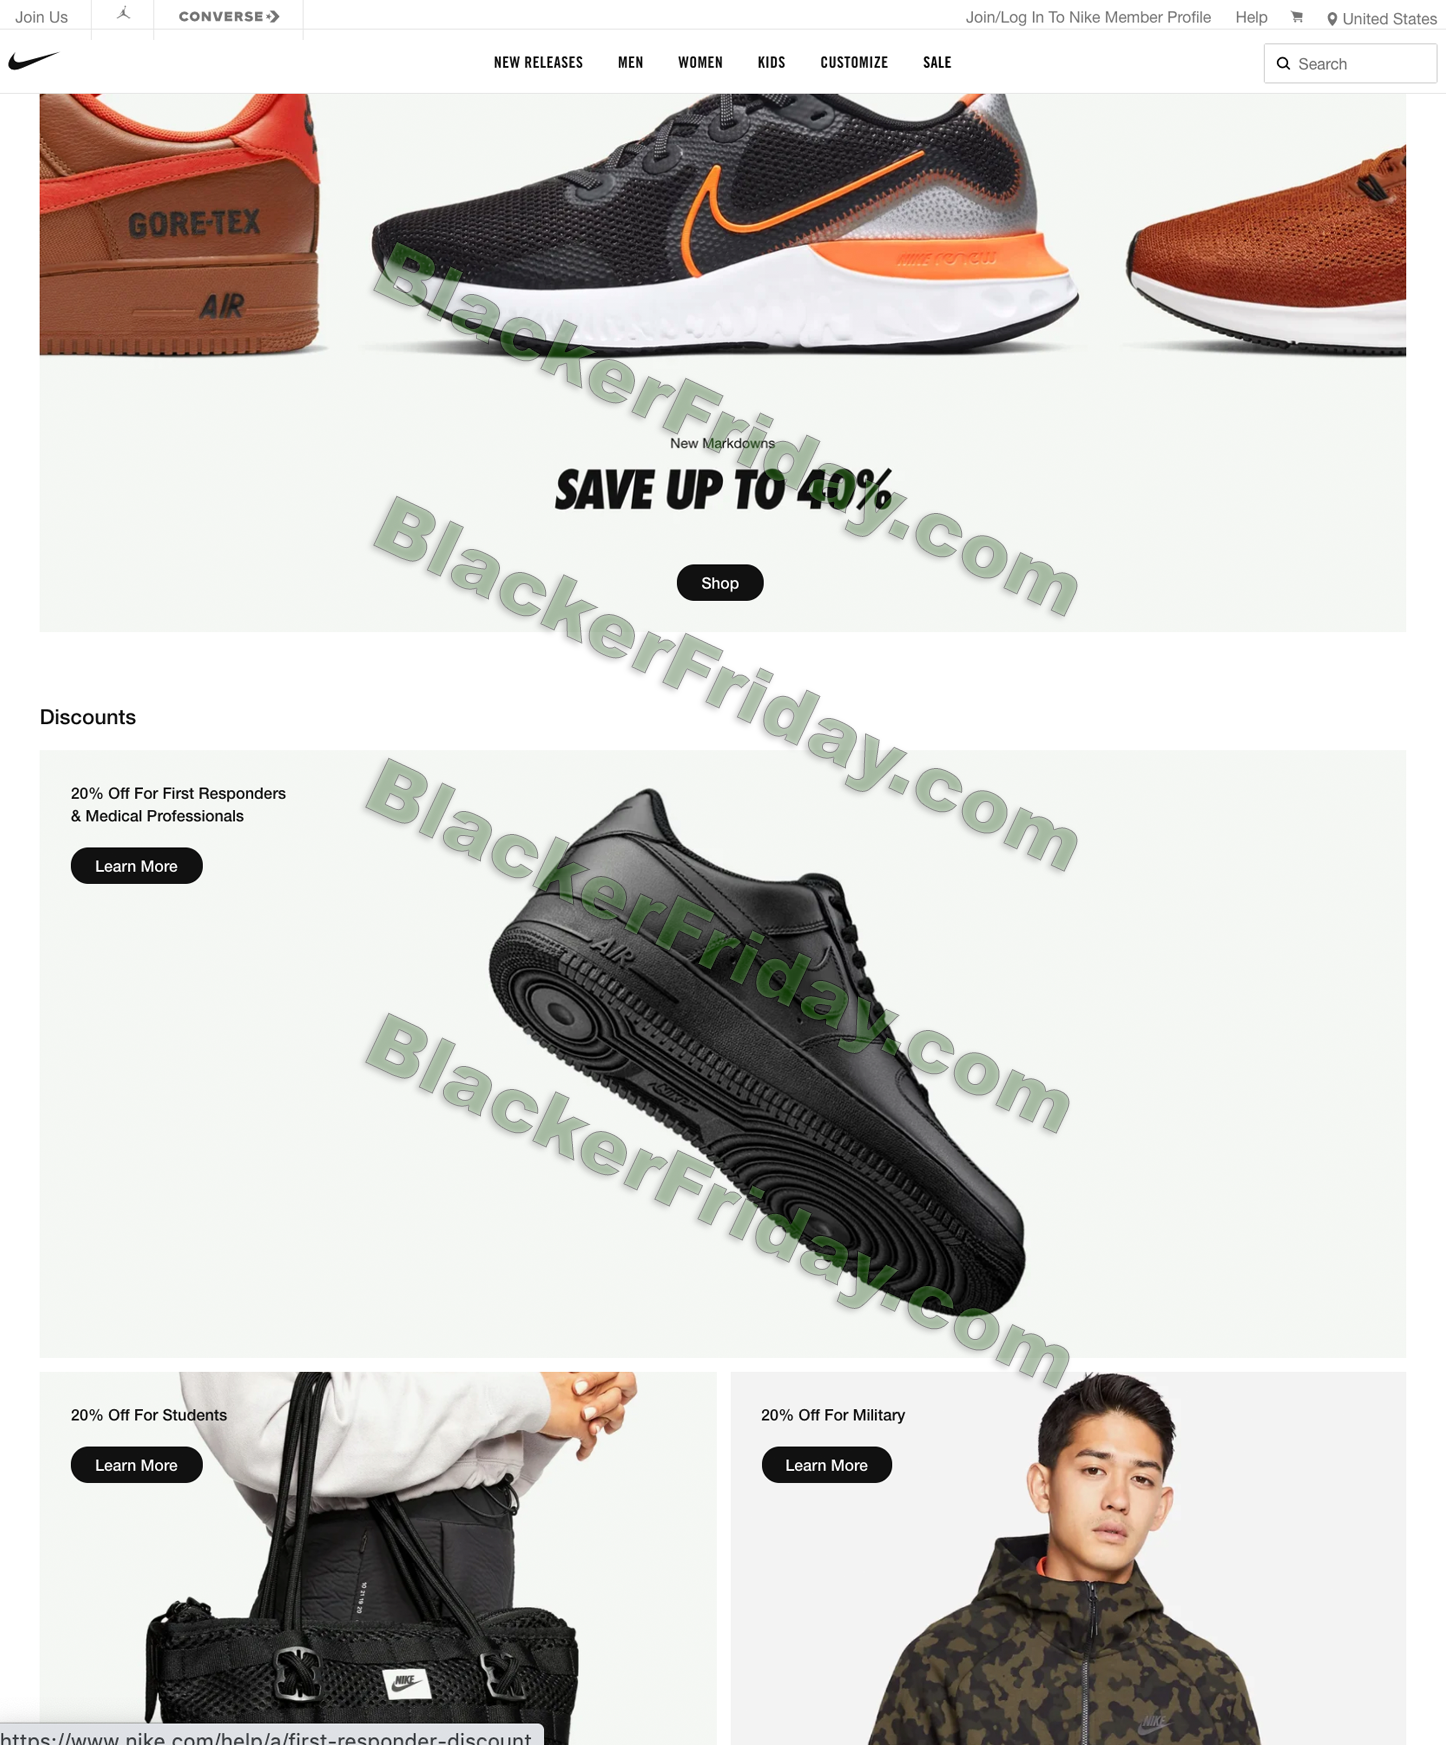 labor day sales nike outlet